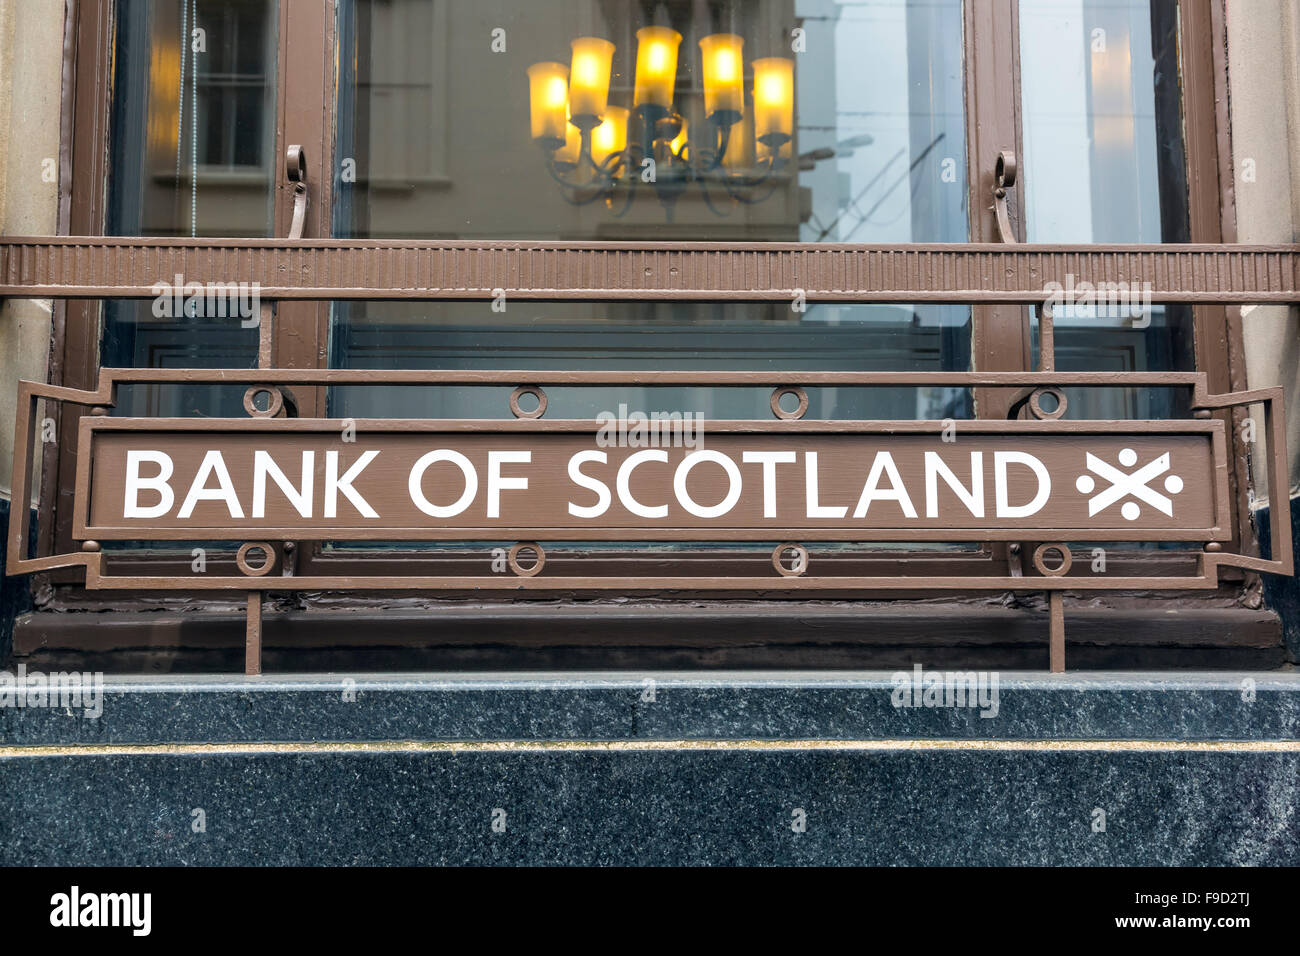 Bank of Scotland sign in a window, UK Stock Photo